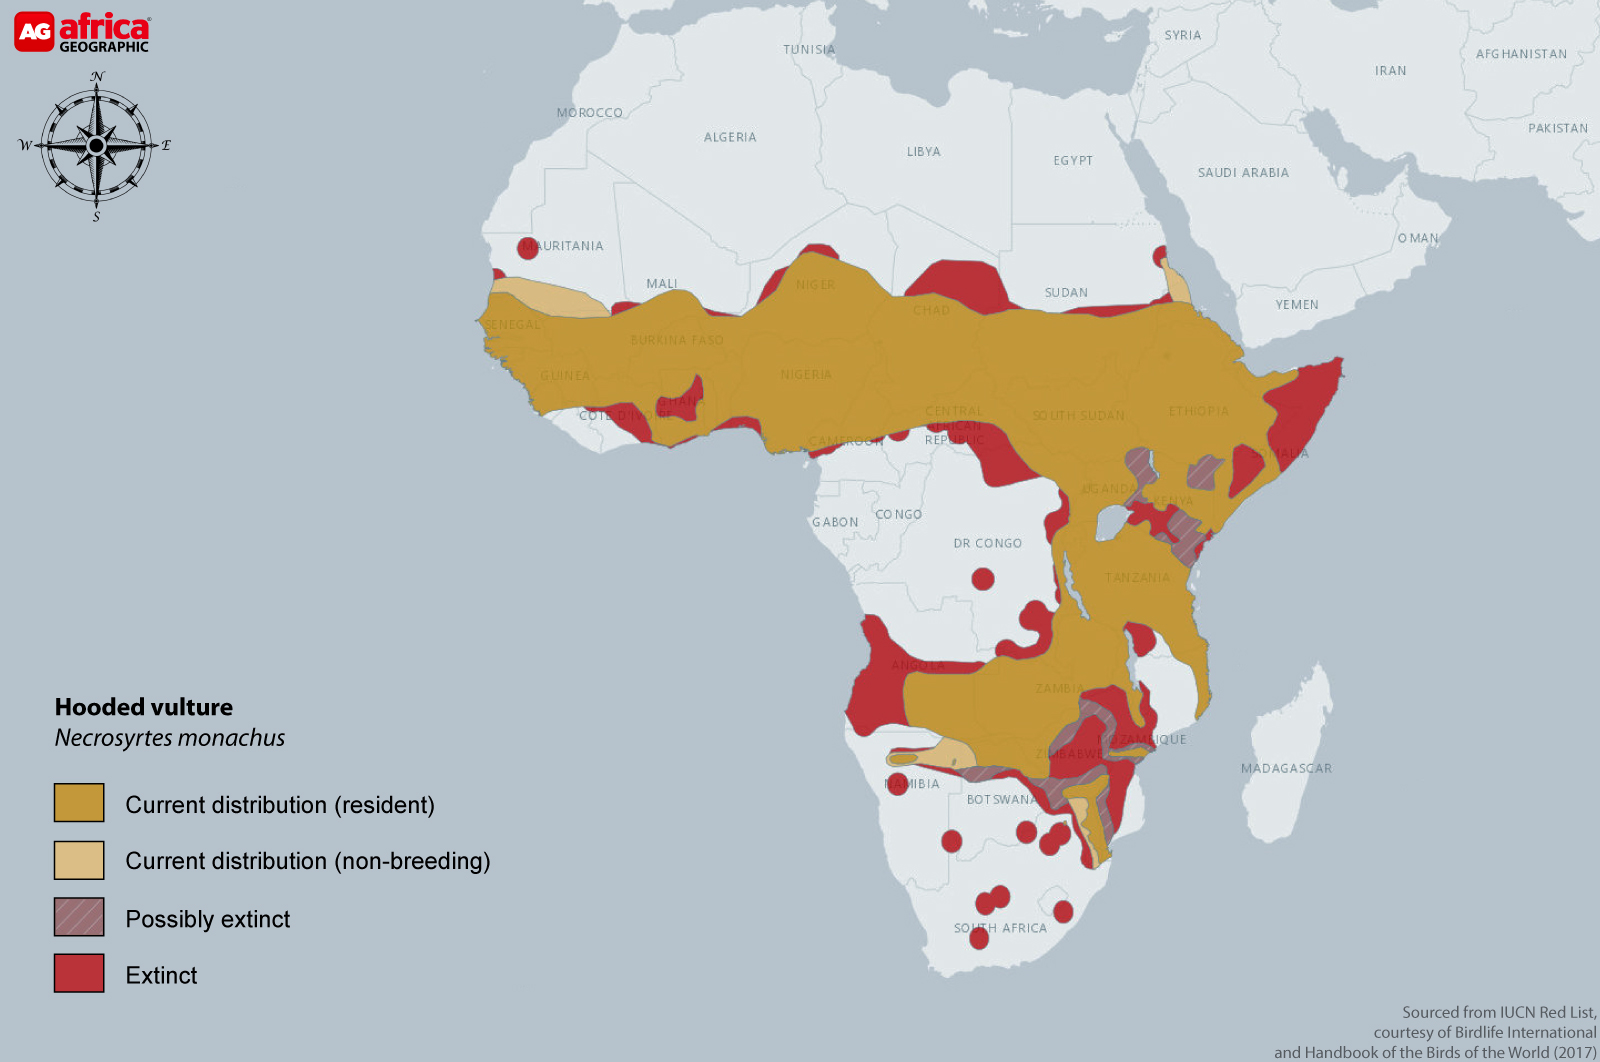 Distribution map of hooded vulture